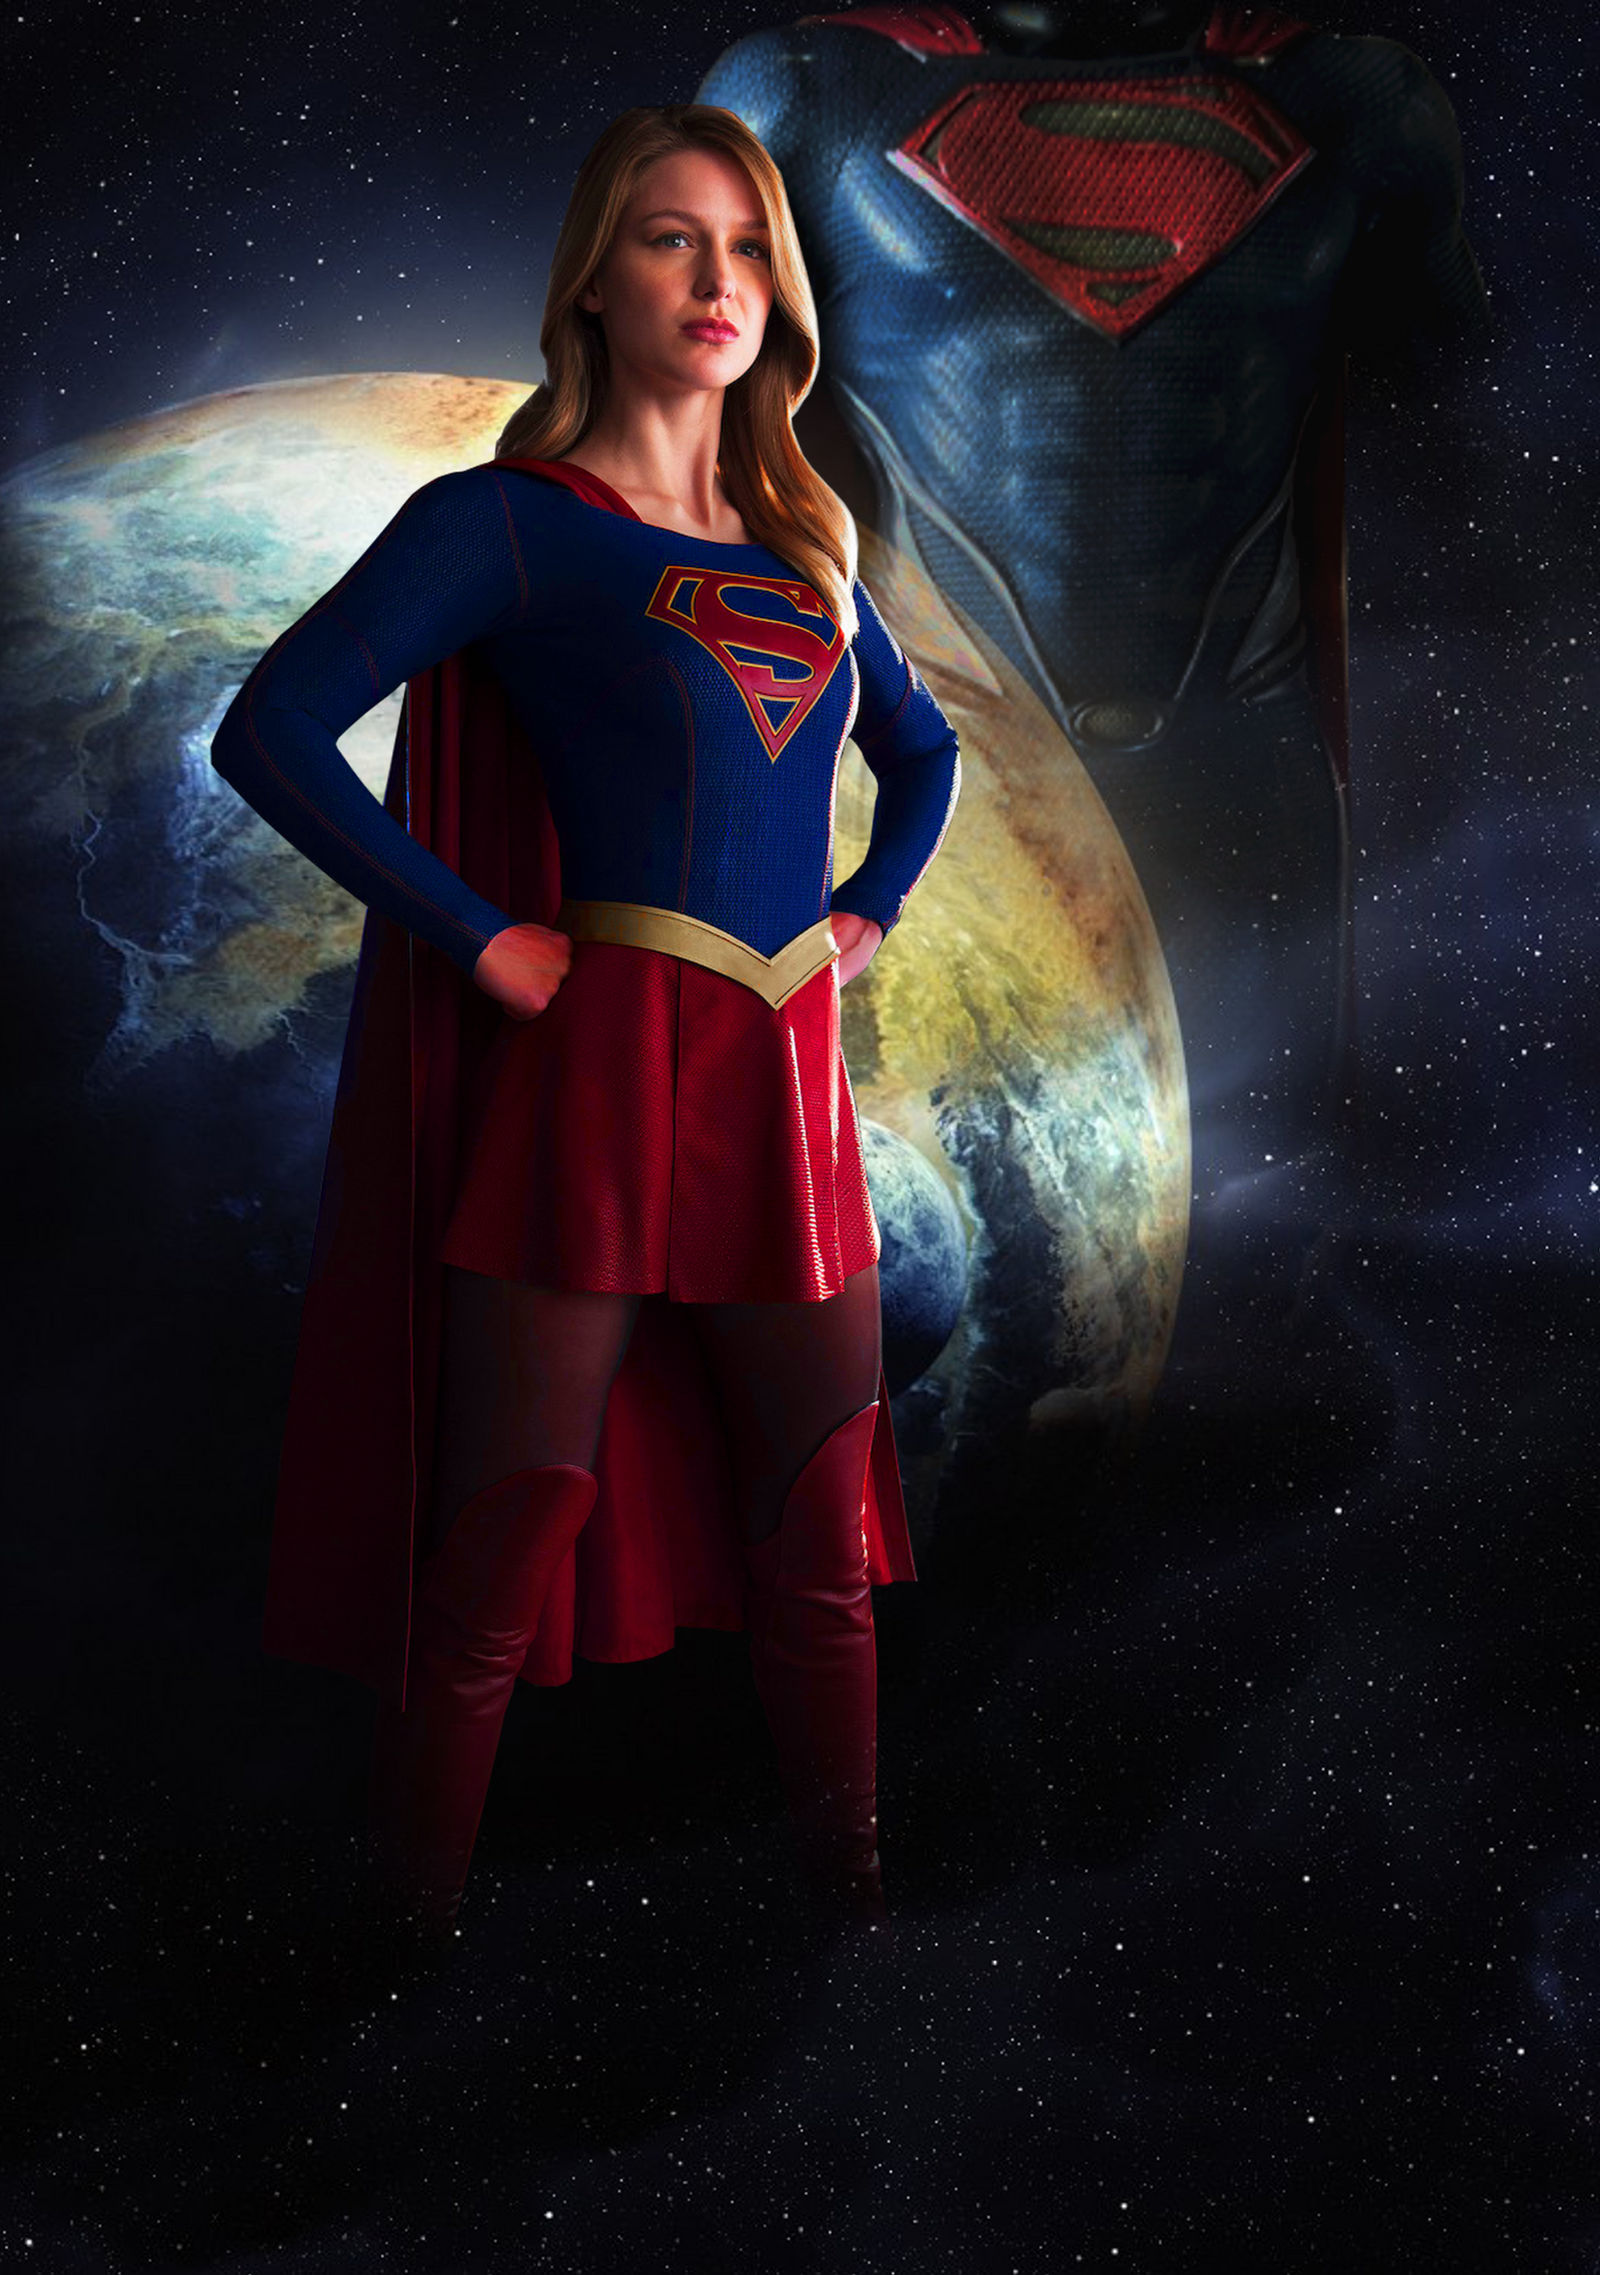 Supergirl wallpaper by arkhamnatic on